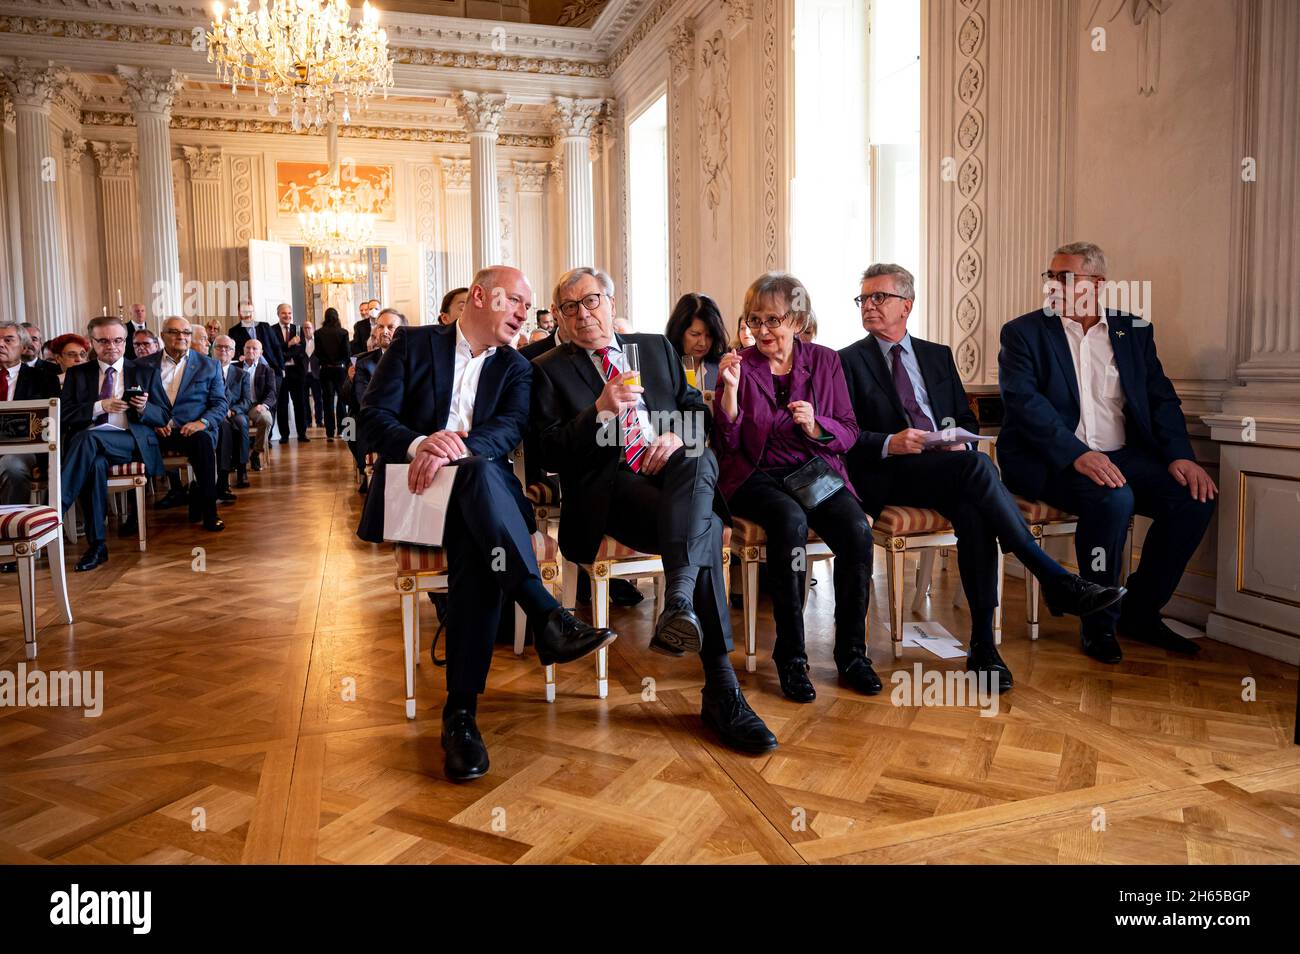 Berlin, Germany. 13th Nov, 2021. Kai Wegner (CDU, l-r), Chairman of the CDU Berlin, Eberhard Diepgen (CDU), Berlin's former Governing Mayor, his wife Monika Diepgen, Thomas de Maiziere (CDU), former Minister of the Interior and Minister of Defense, and Thomas Georgi (CDU), State Chairman of the Union Relief Organization, sit together at the reception for Diepgen's 80th birthday at Schloss Friedrichsfelde. The CDU politician Diepgen was governing mayor from 1984 to 1989 and from 1991 to 2001. Credit: Fabian Sommer/dpa/Alamy Live News Stock Photo